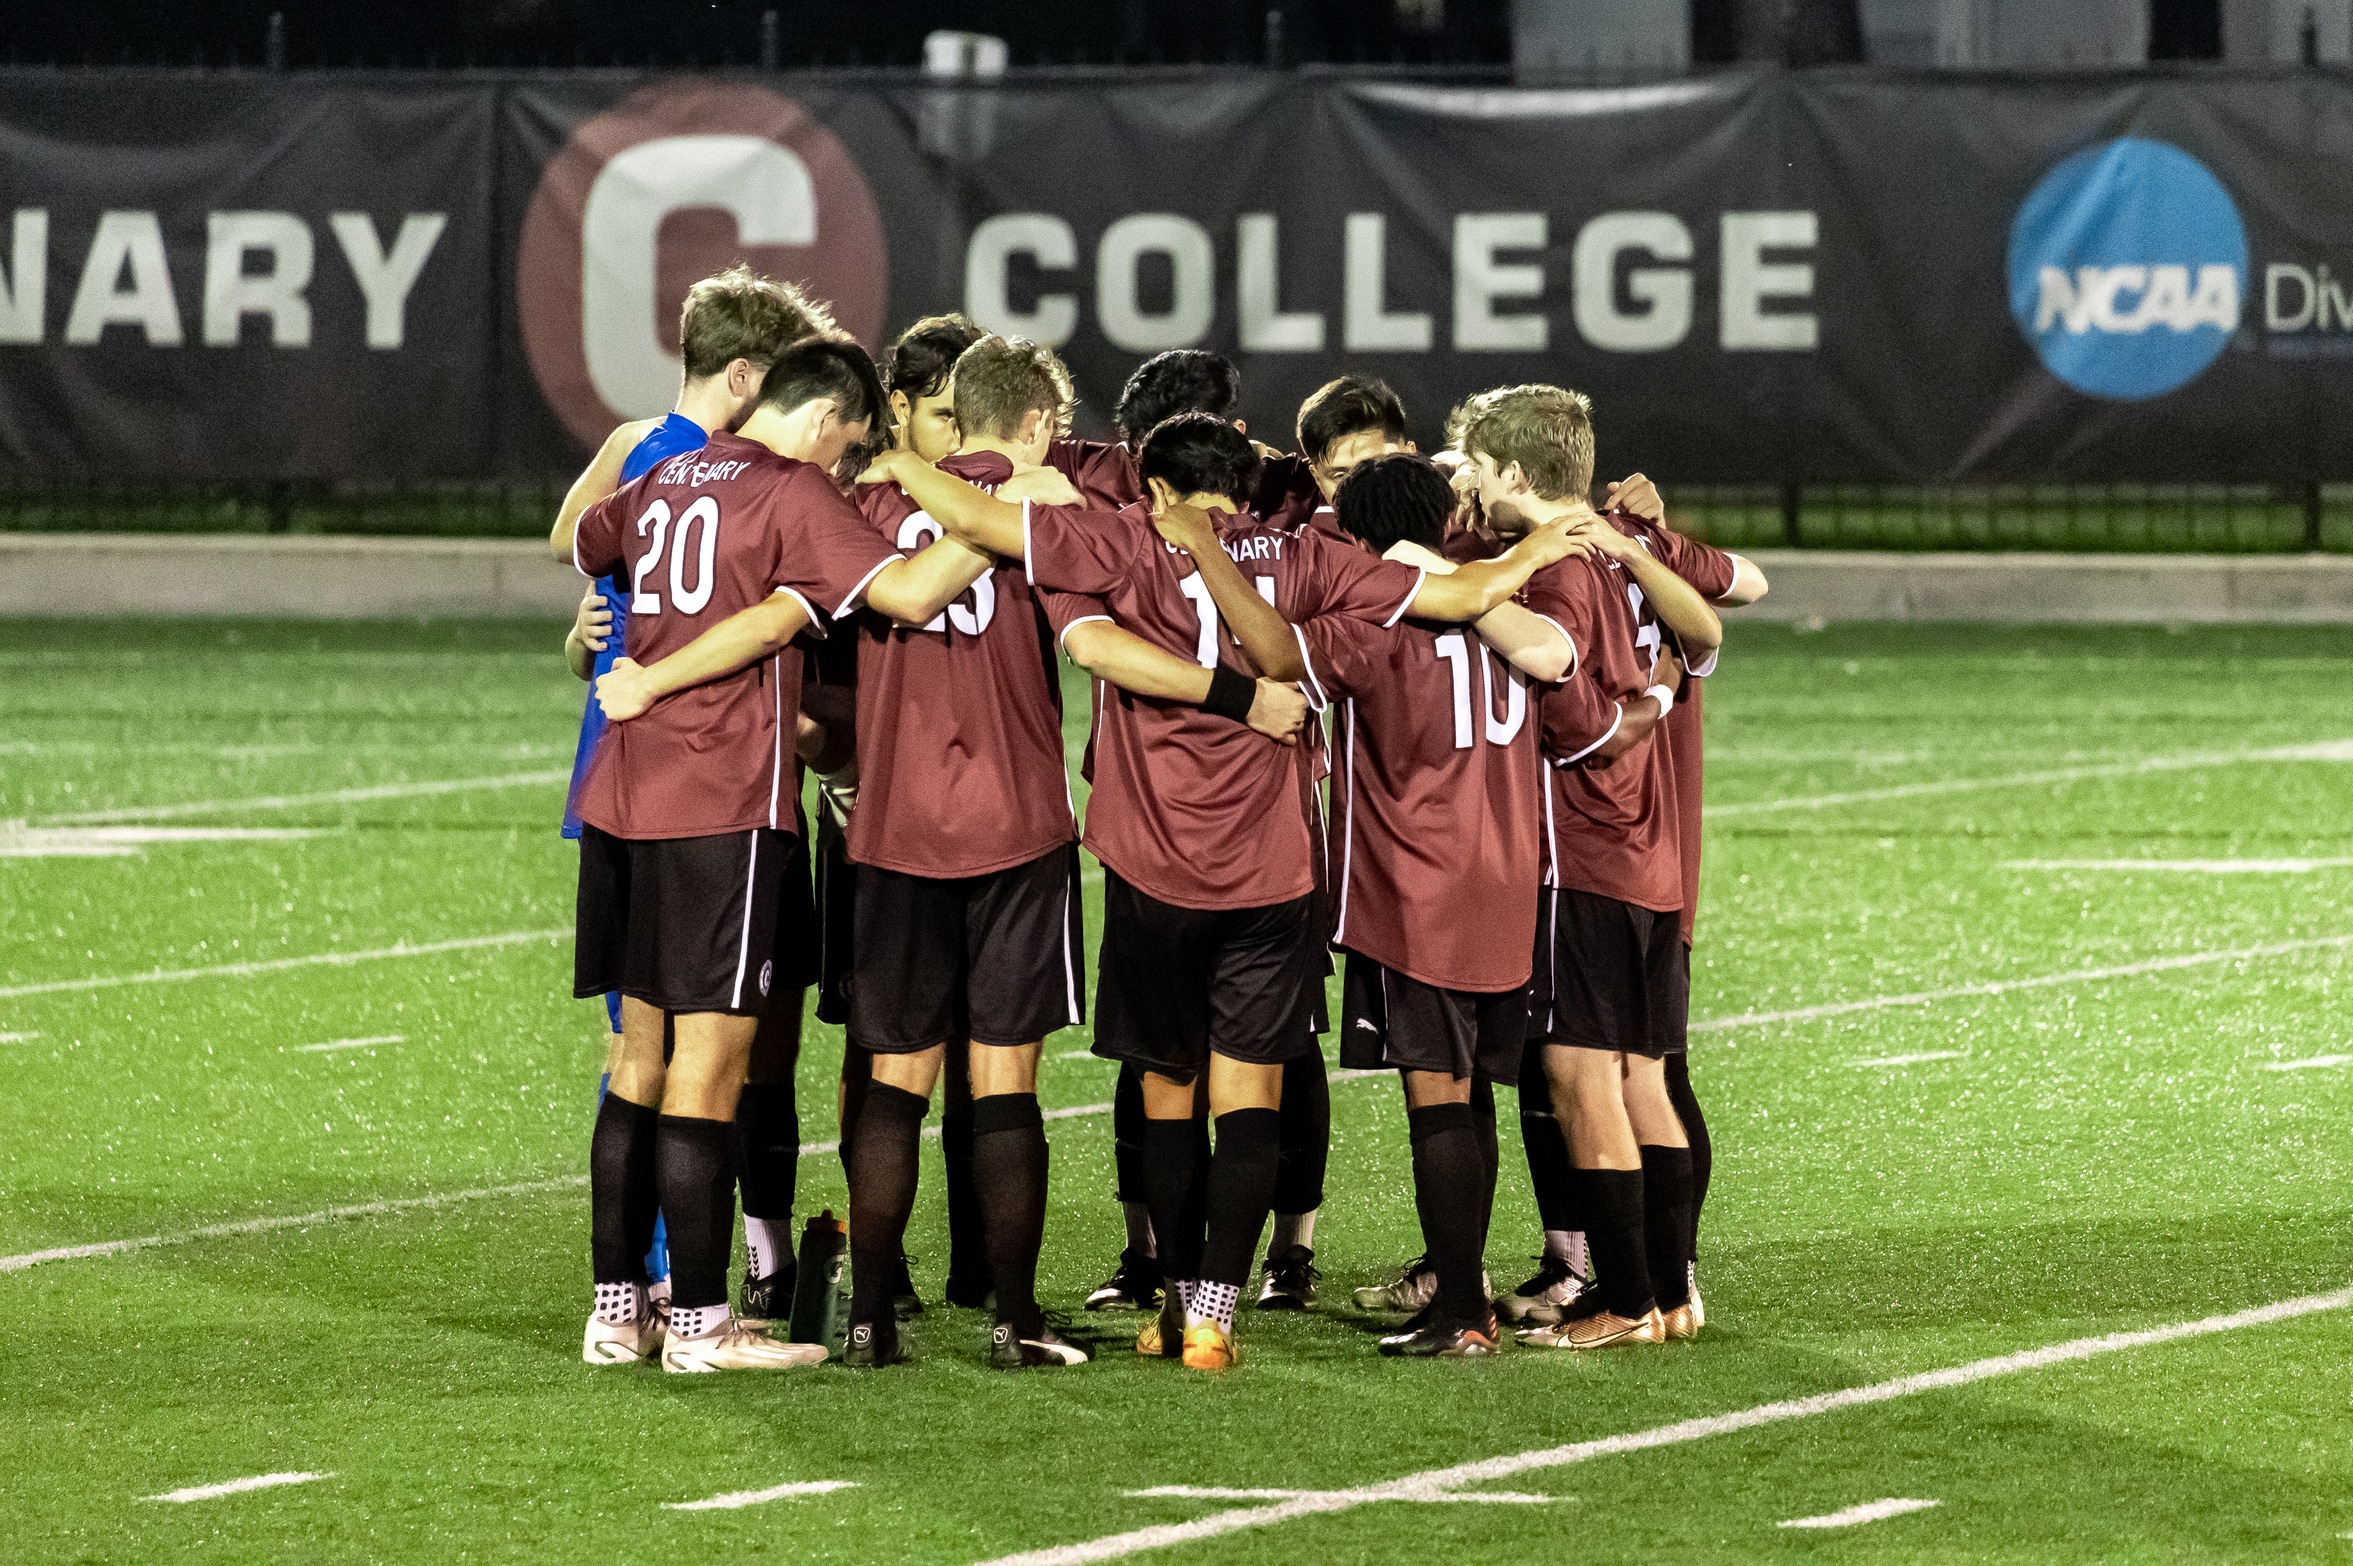 The Gents fell 3-2 on Friday night against Schreiner.